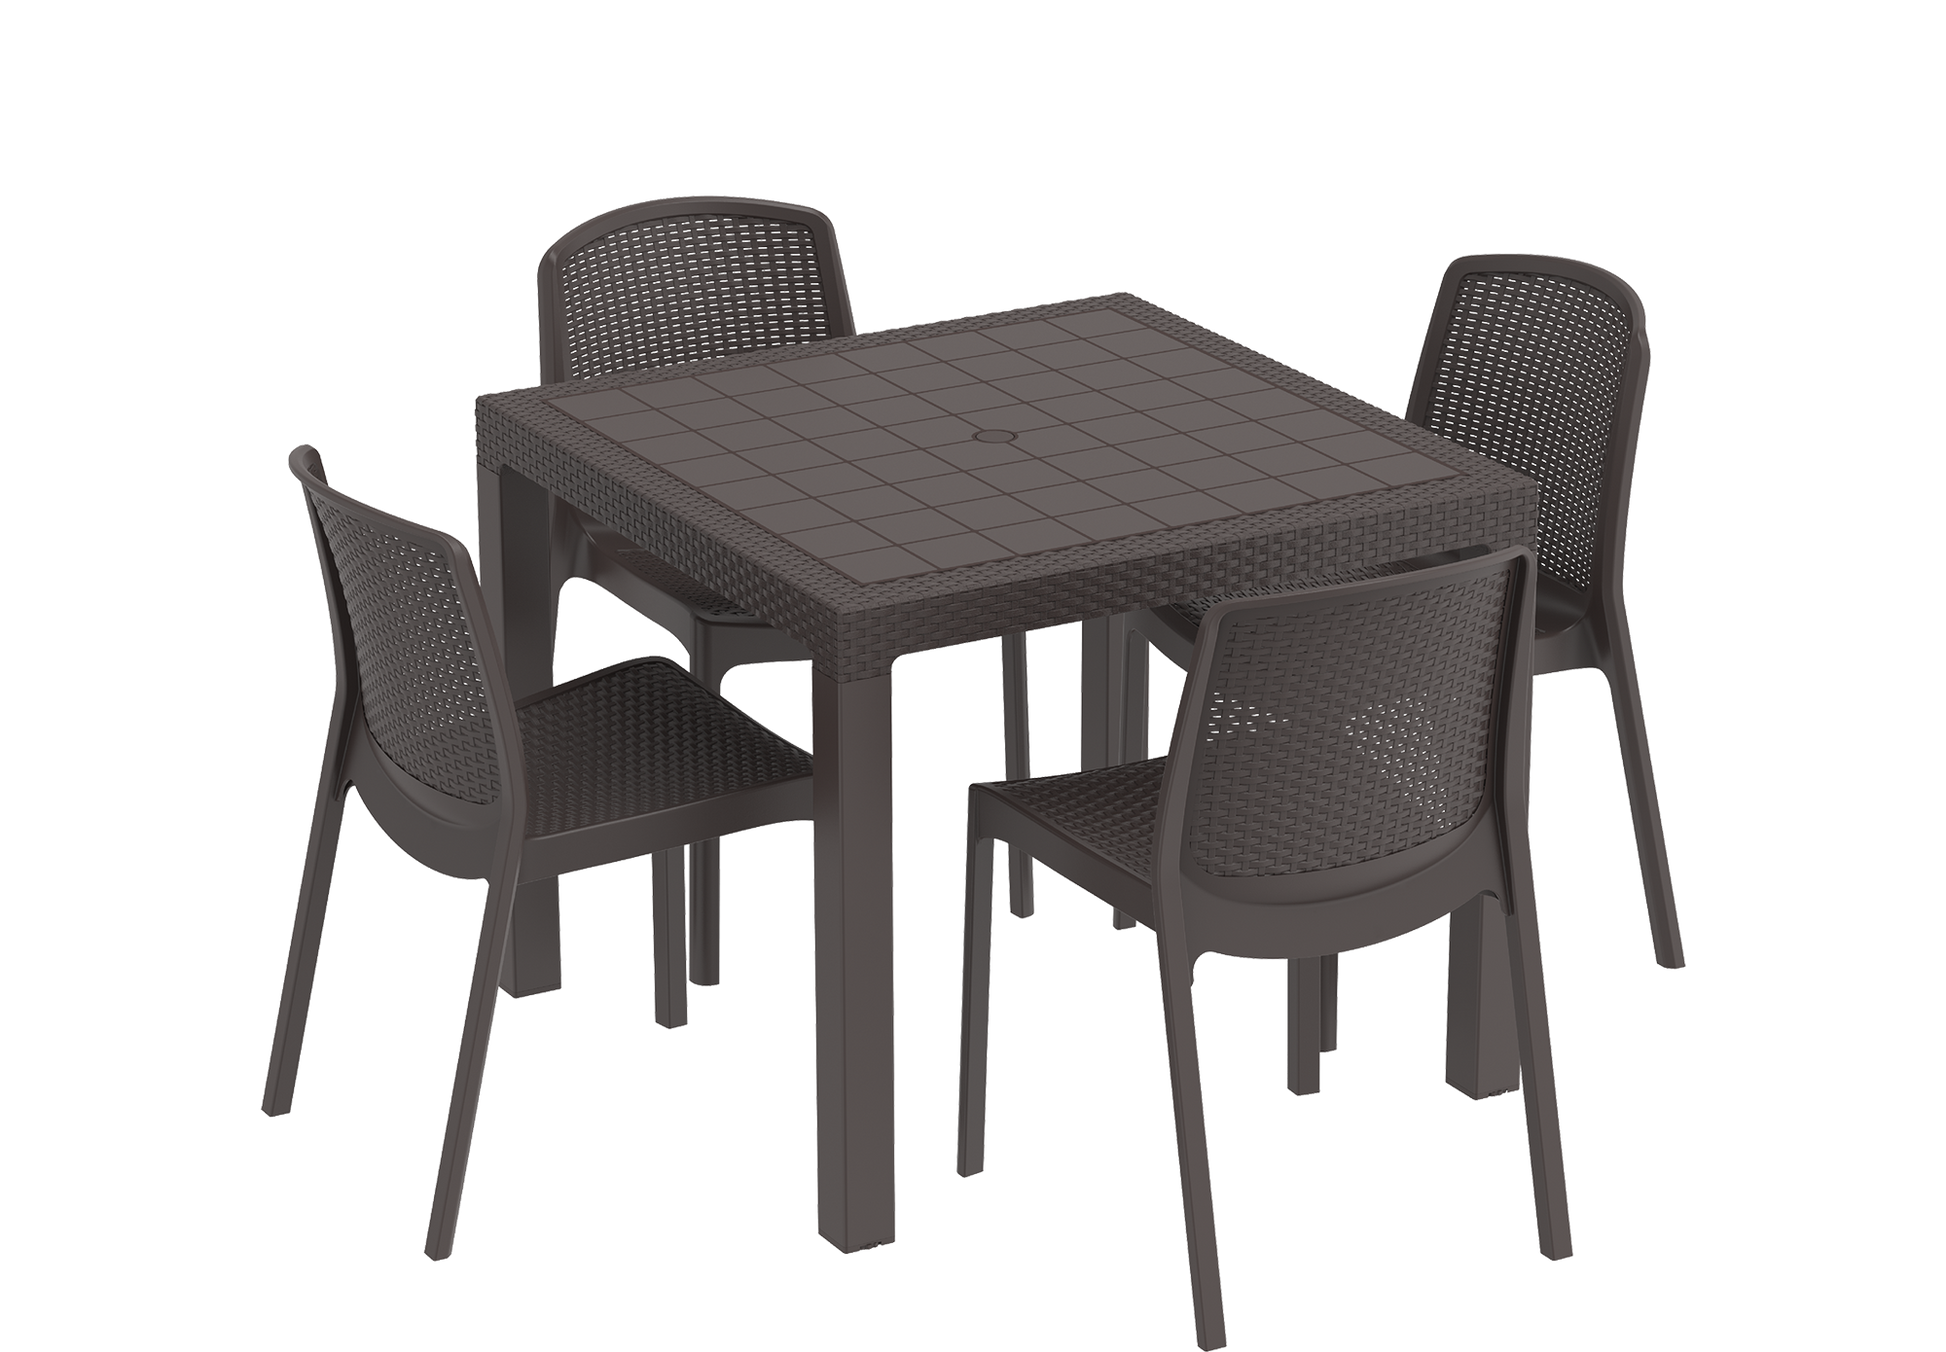 Cedarattan 4-seater Outdoor Dining Set of Table & Chairs - Cosmoplast Bahrain